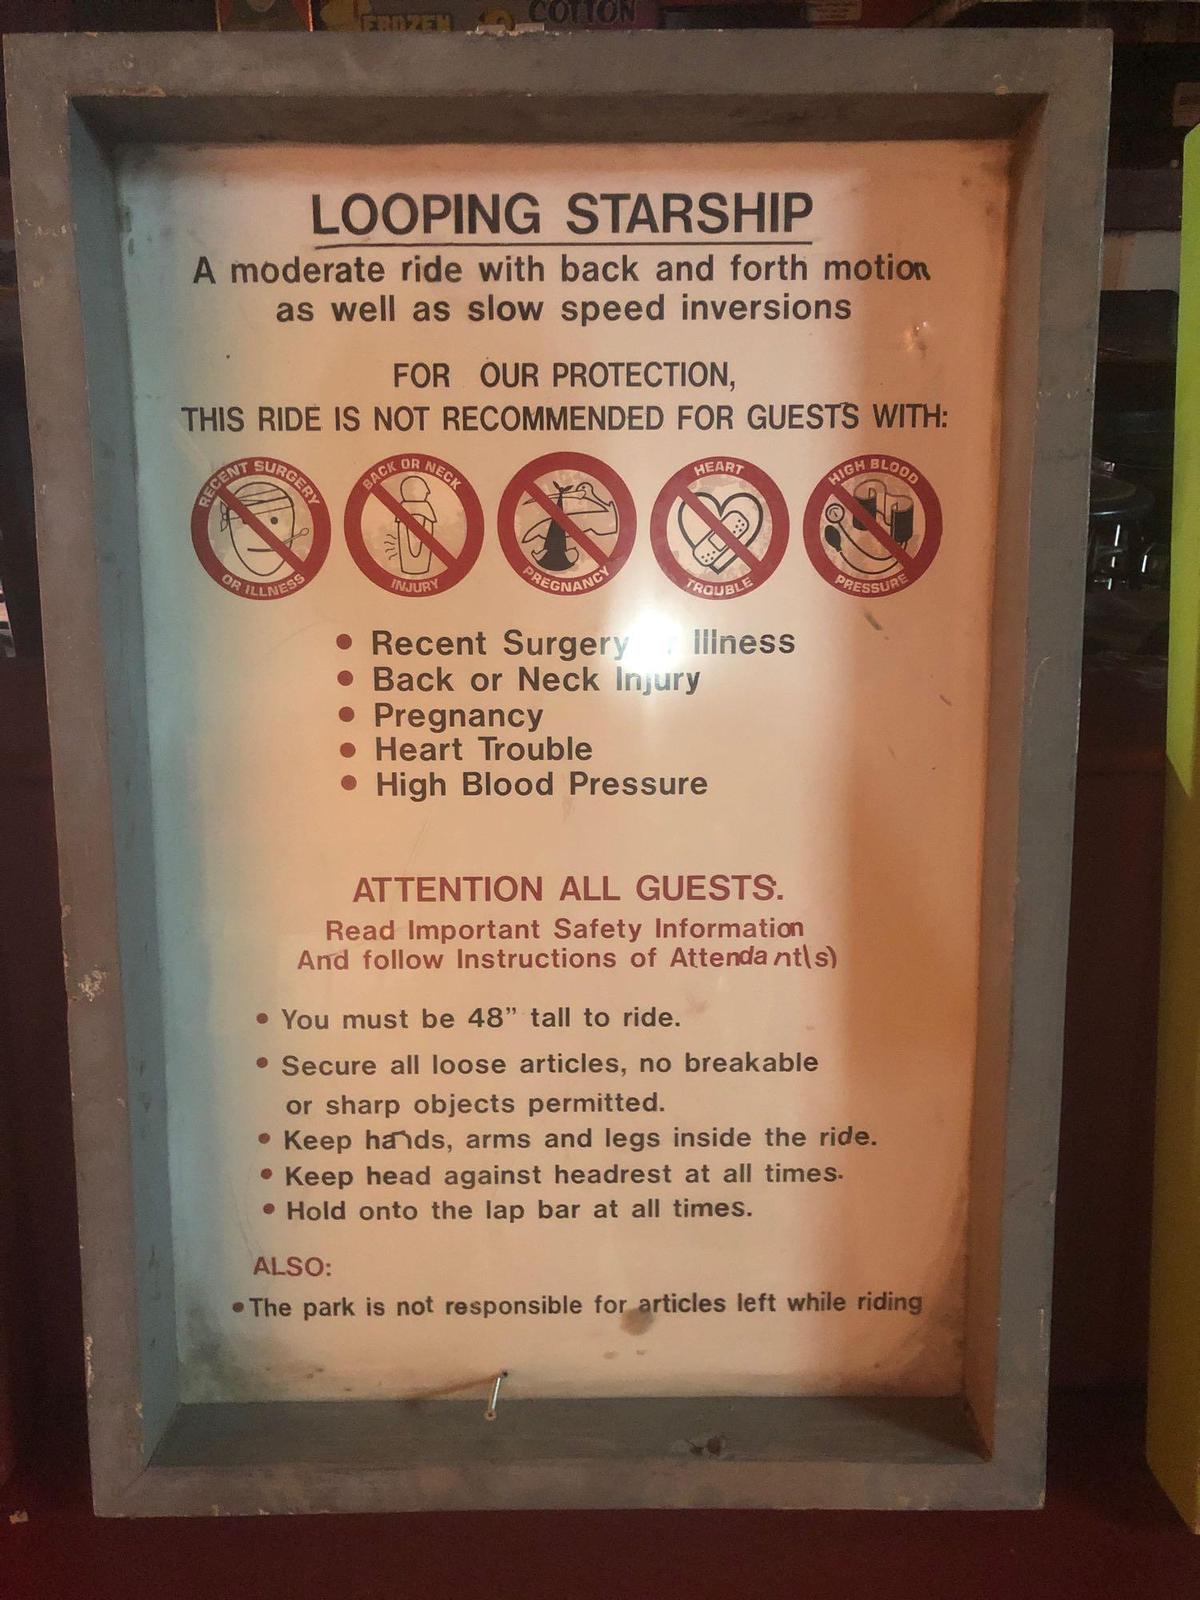 Looping Starship ride instructional safety sign